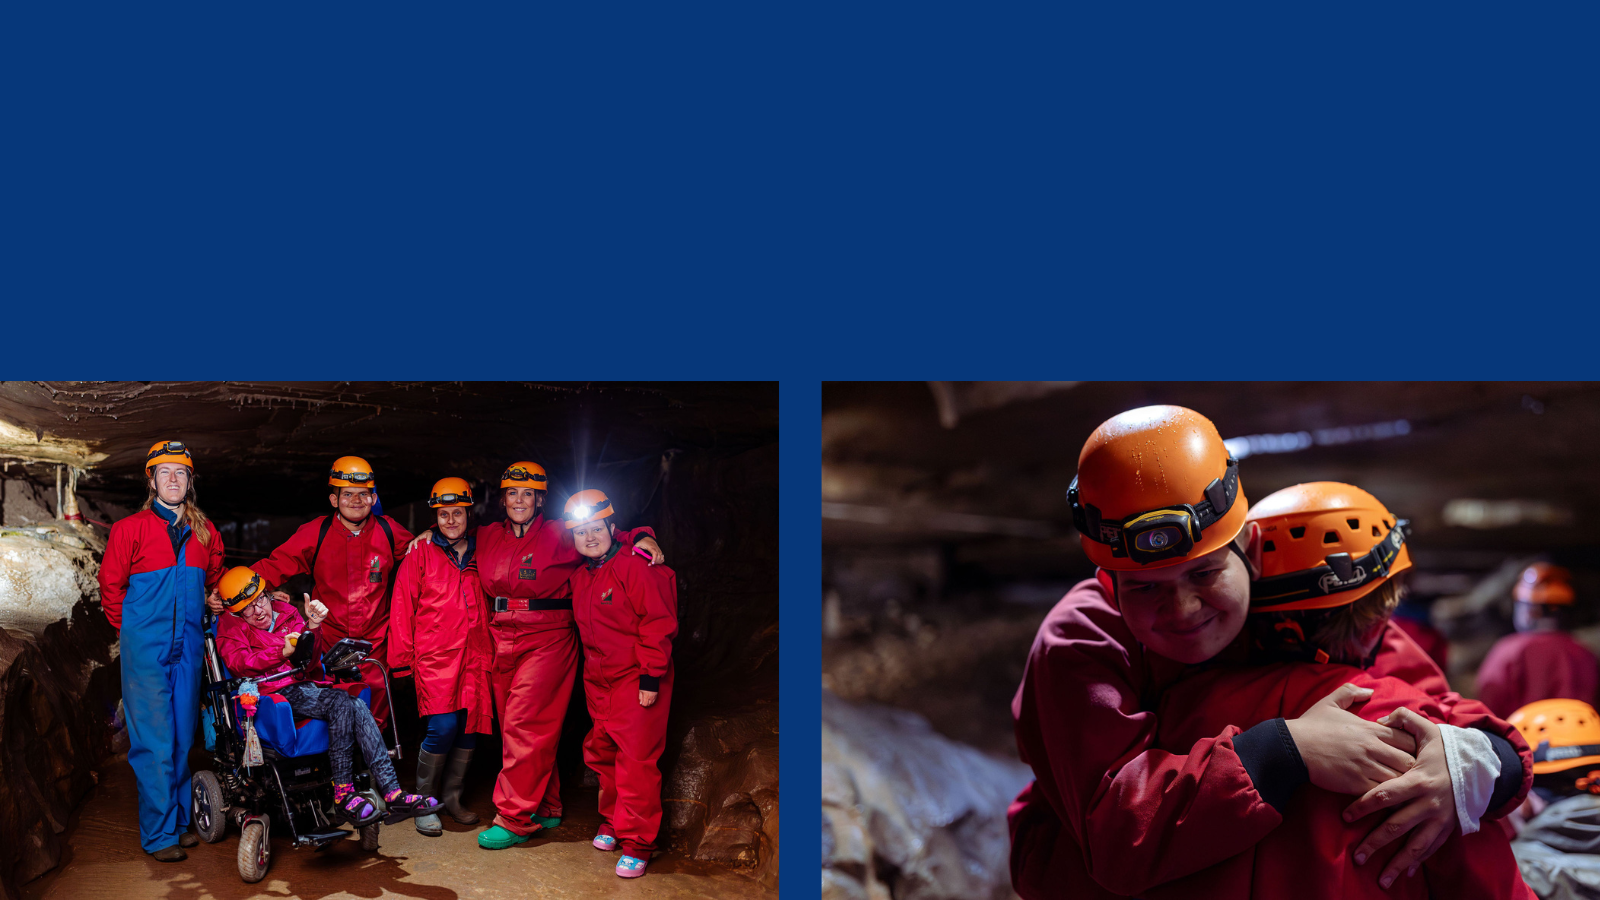 The image on the left-hand side is of a group of young-adults wearing red waterproof overalls and orange hard hats whilst inside a cave, one person within the group is a powerchair user. The image on the right-hand side is of two of the young-adults hugging each other whilst in the cave.